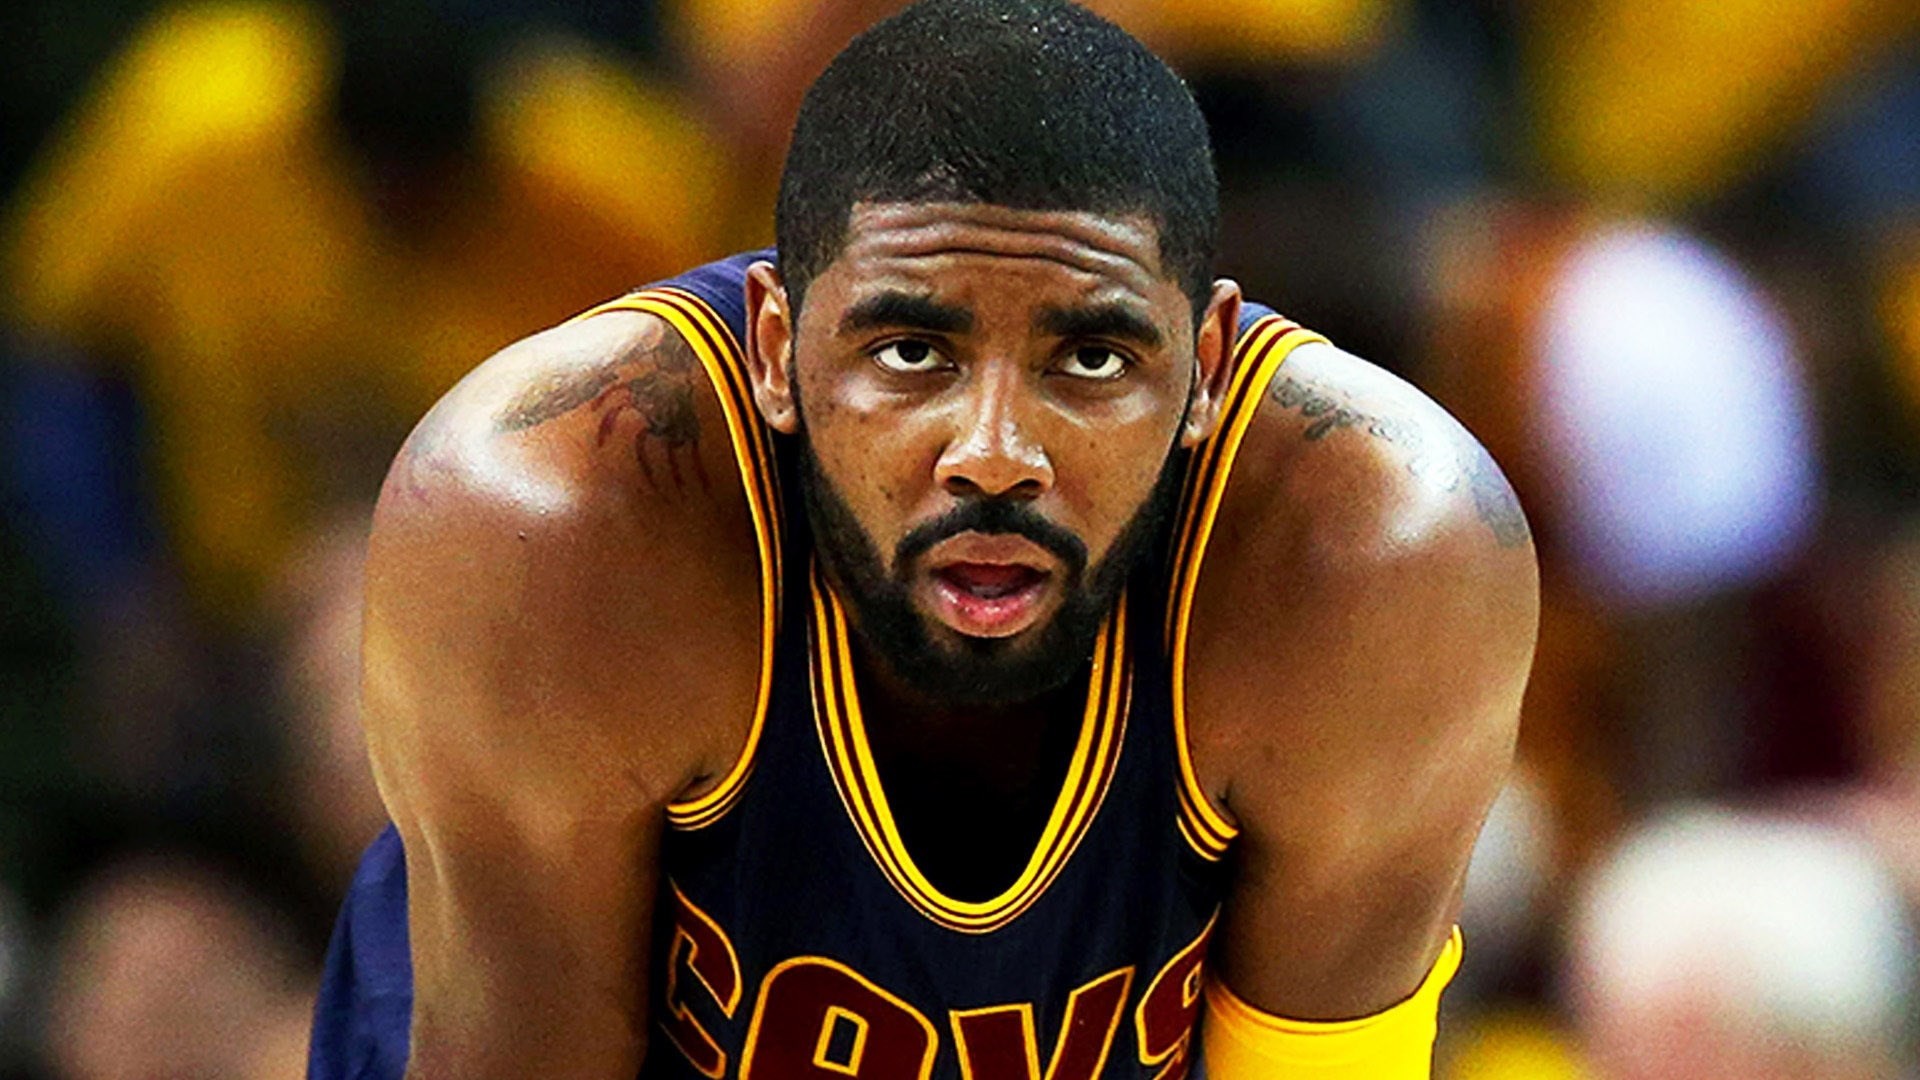 1920x1080 wallpapers free kyrie irving,  (344 kB)